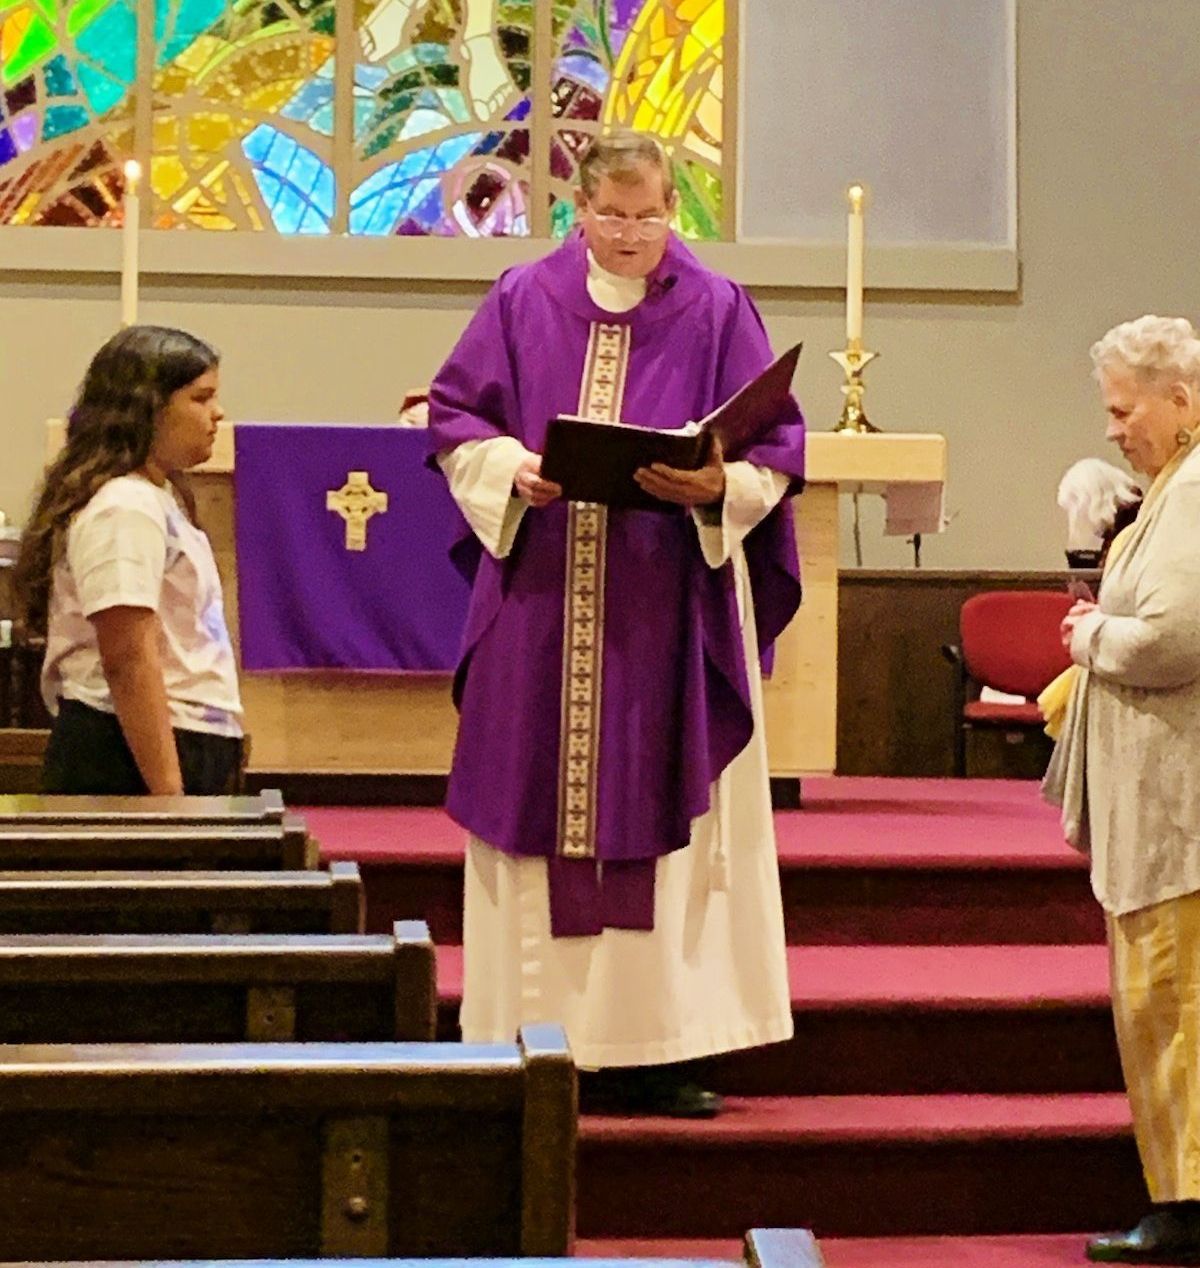 Young girl and adult woman stand with Priest during conformation ceremony